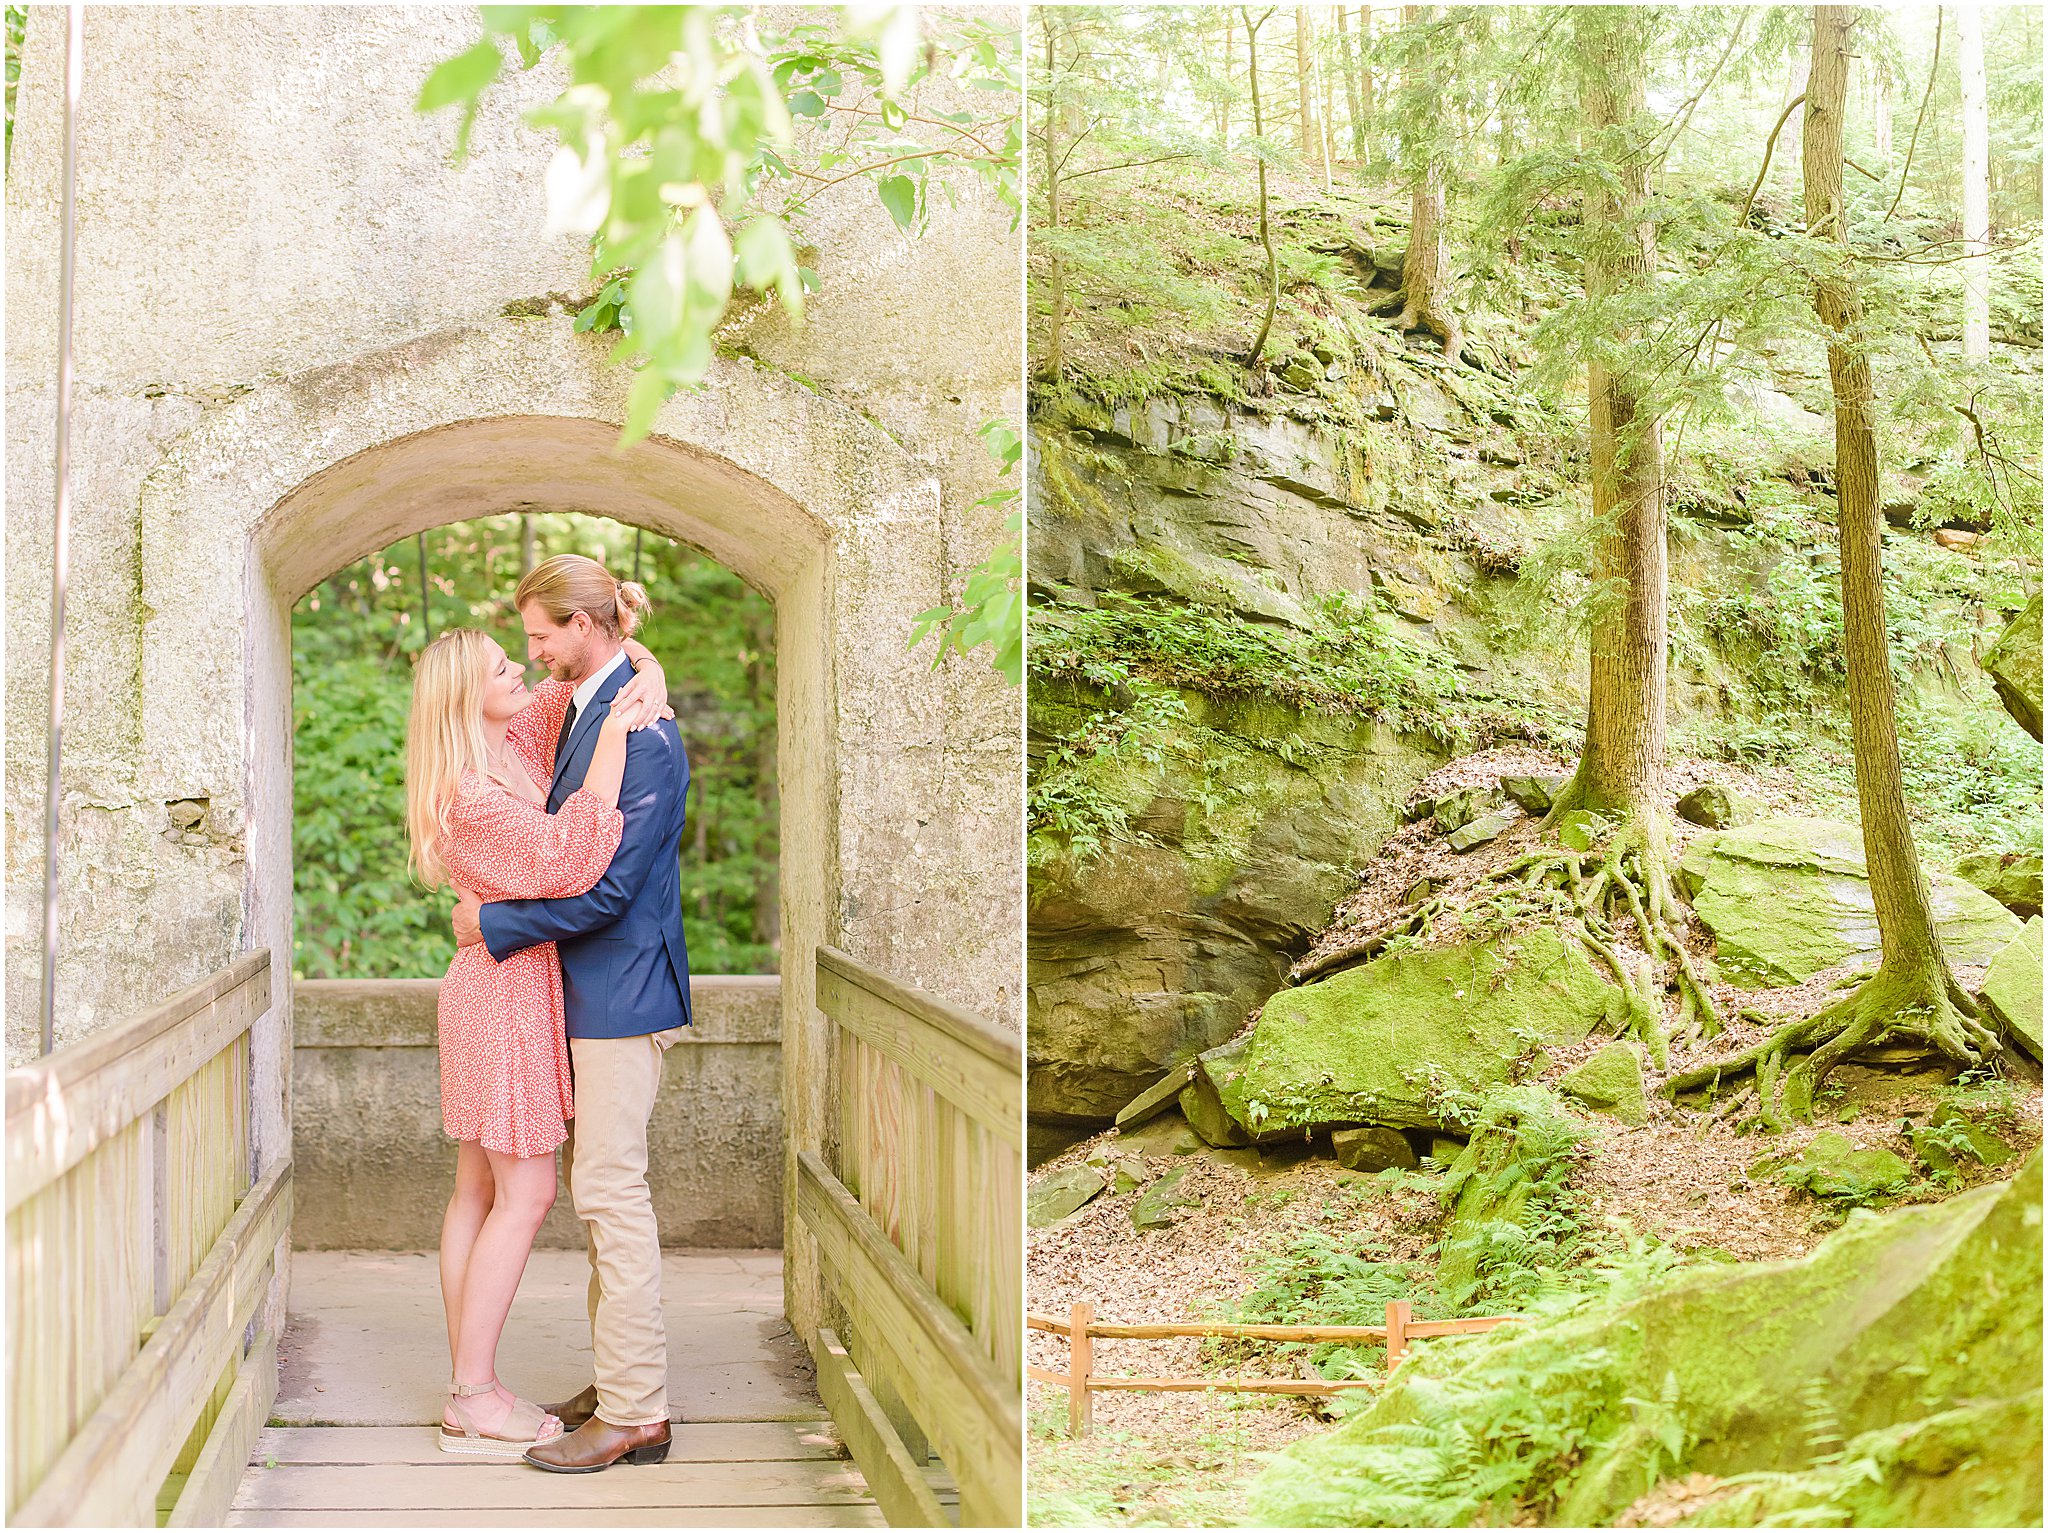 Couple nose to nose standing on bridge during Turkey Run State Park engagement session